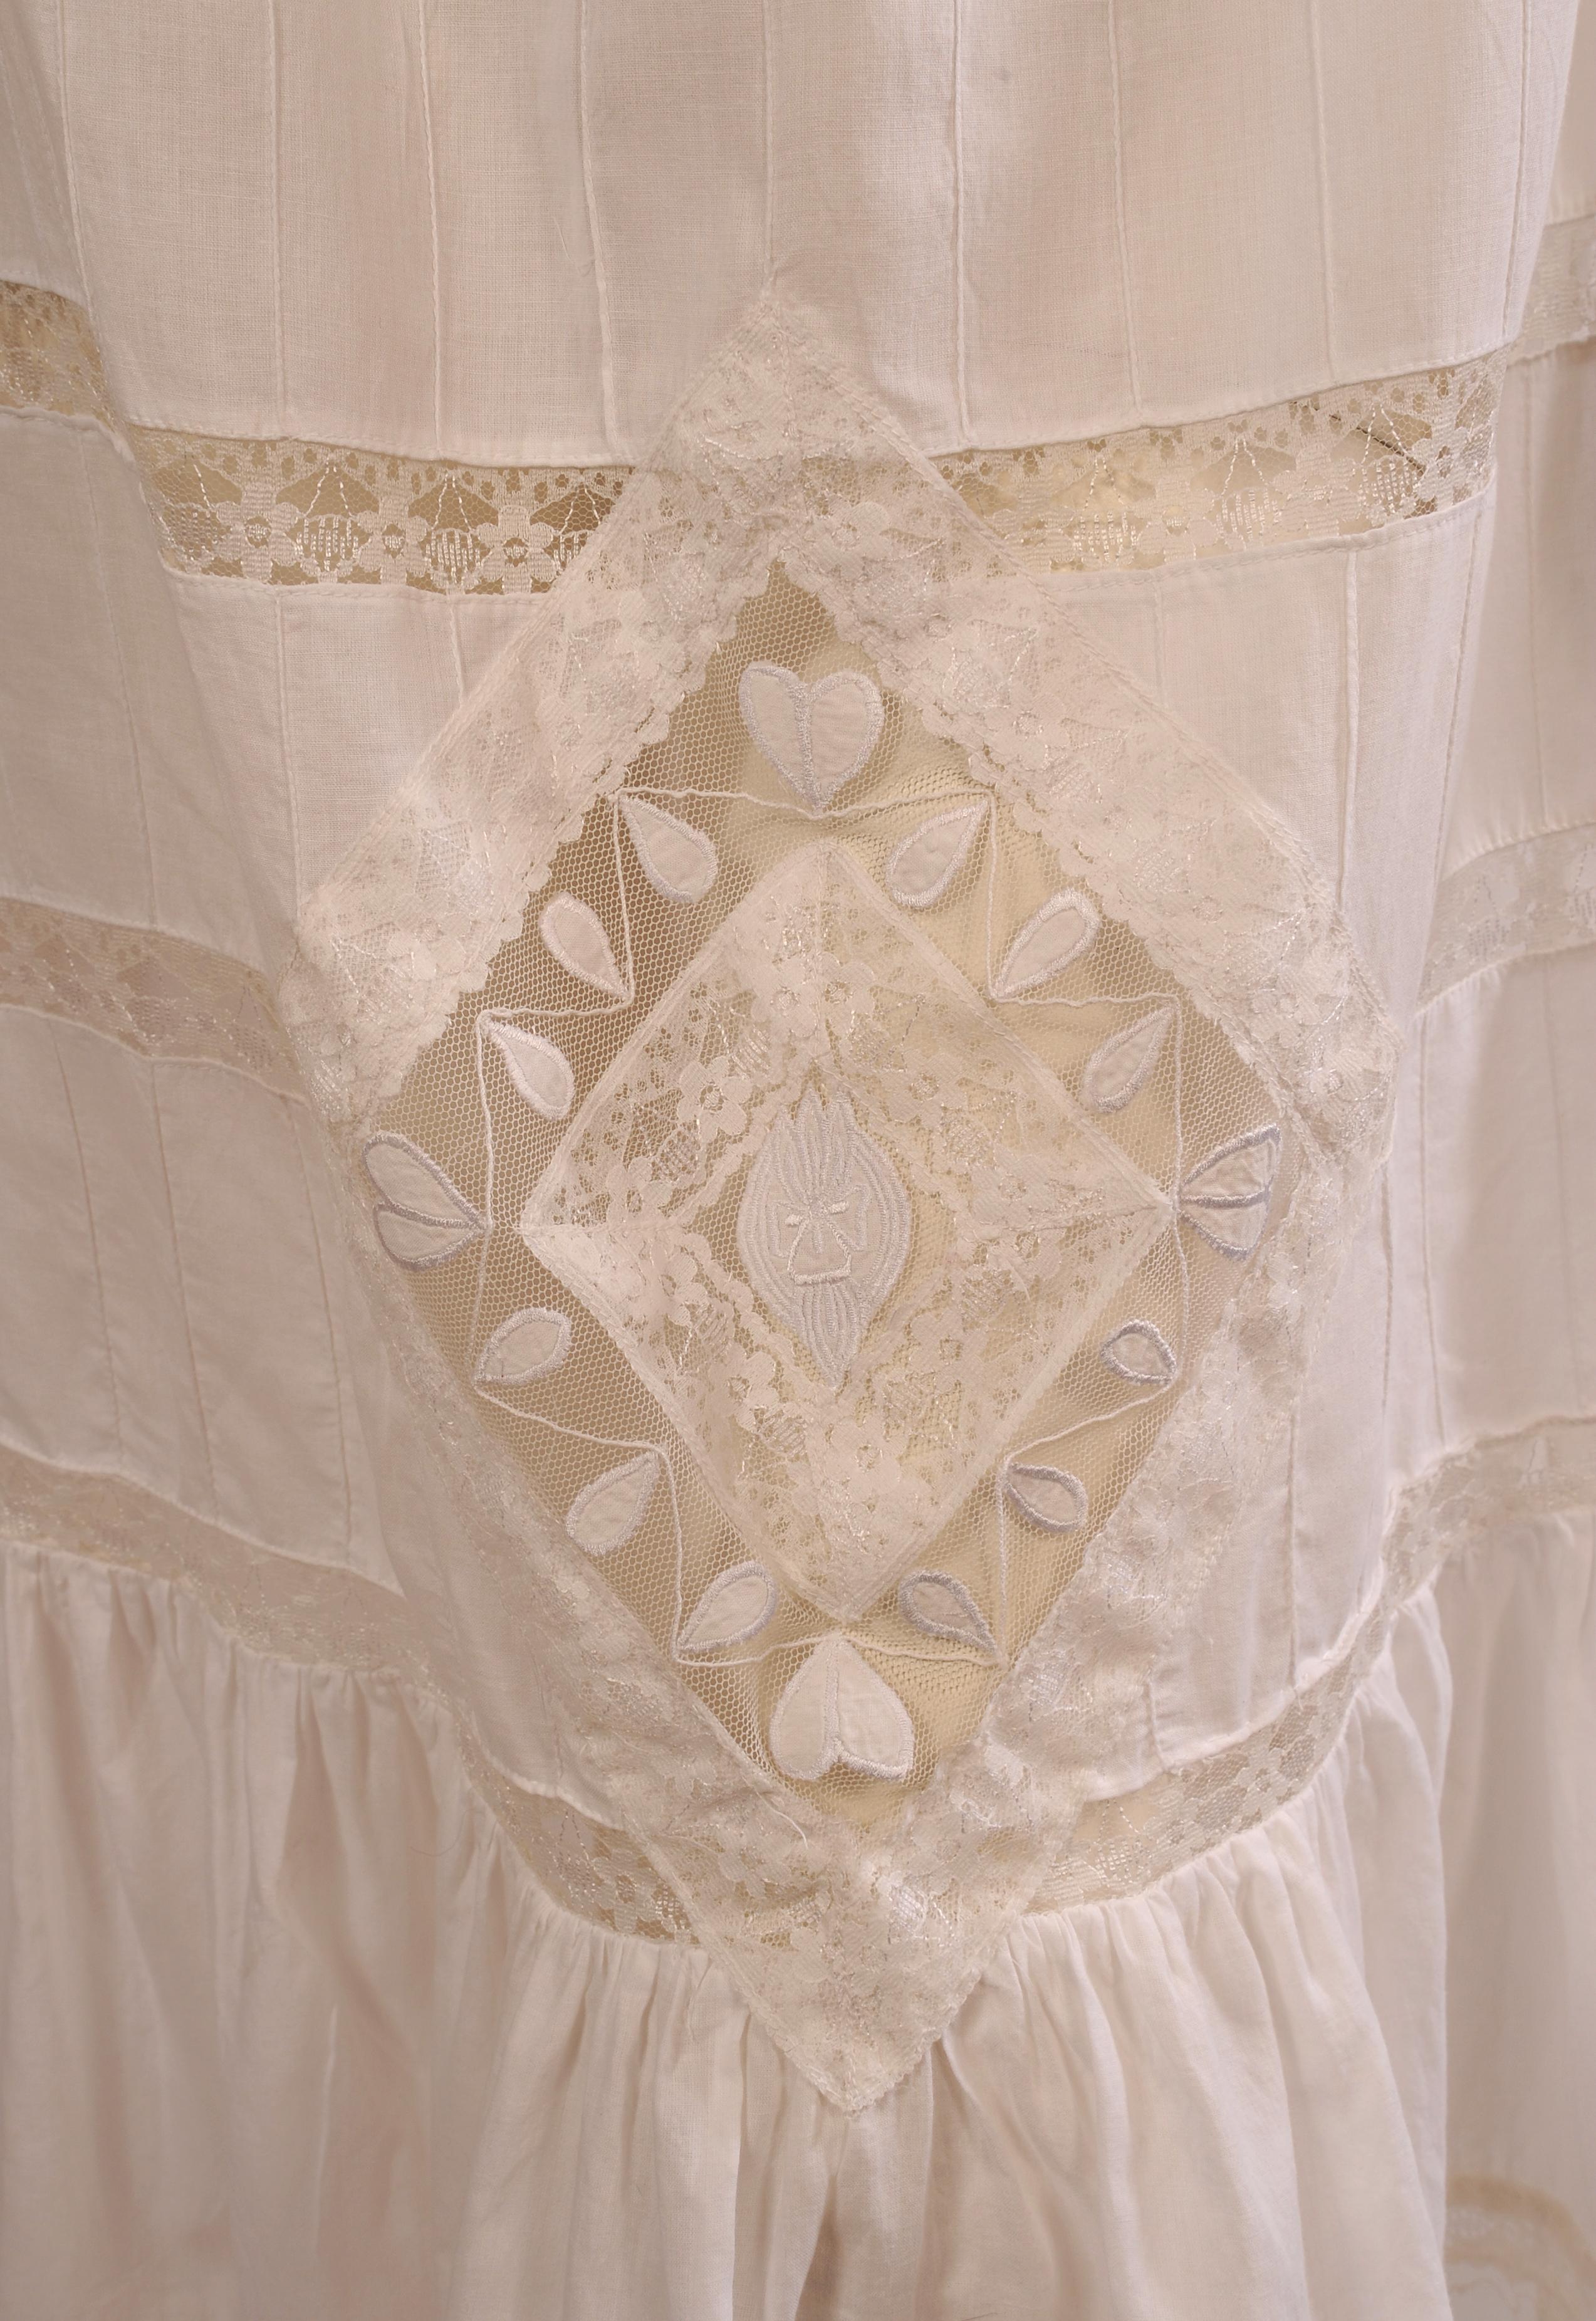 Victorian Inspired White Cotton and Lace Dress circa 1980 For Sale 1